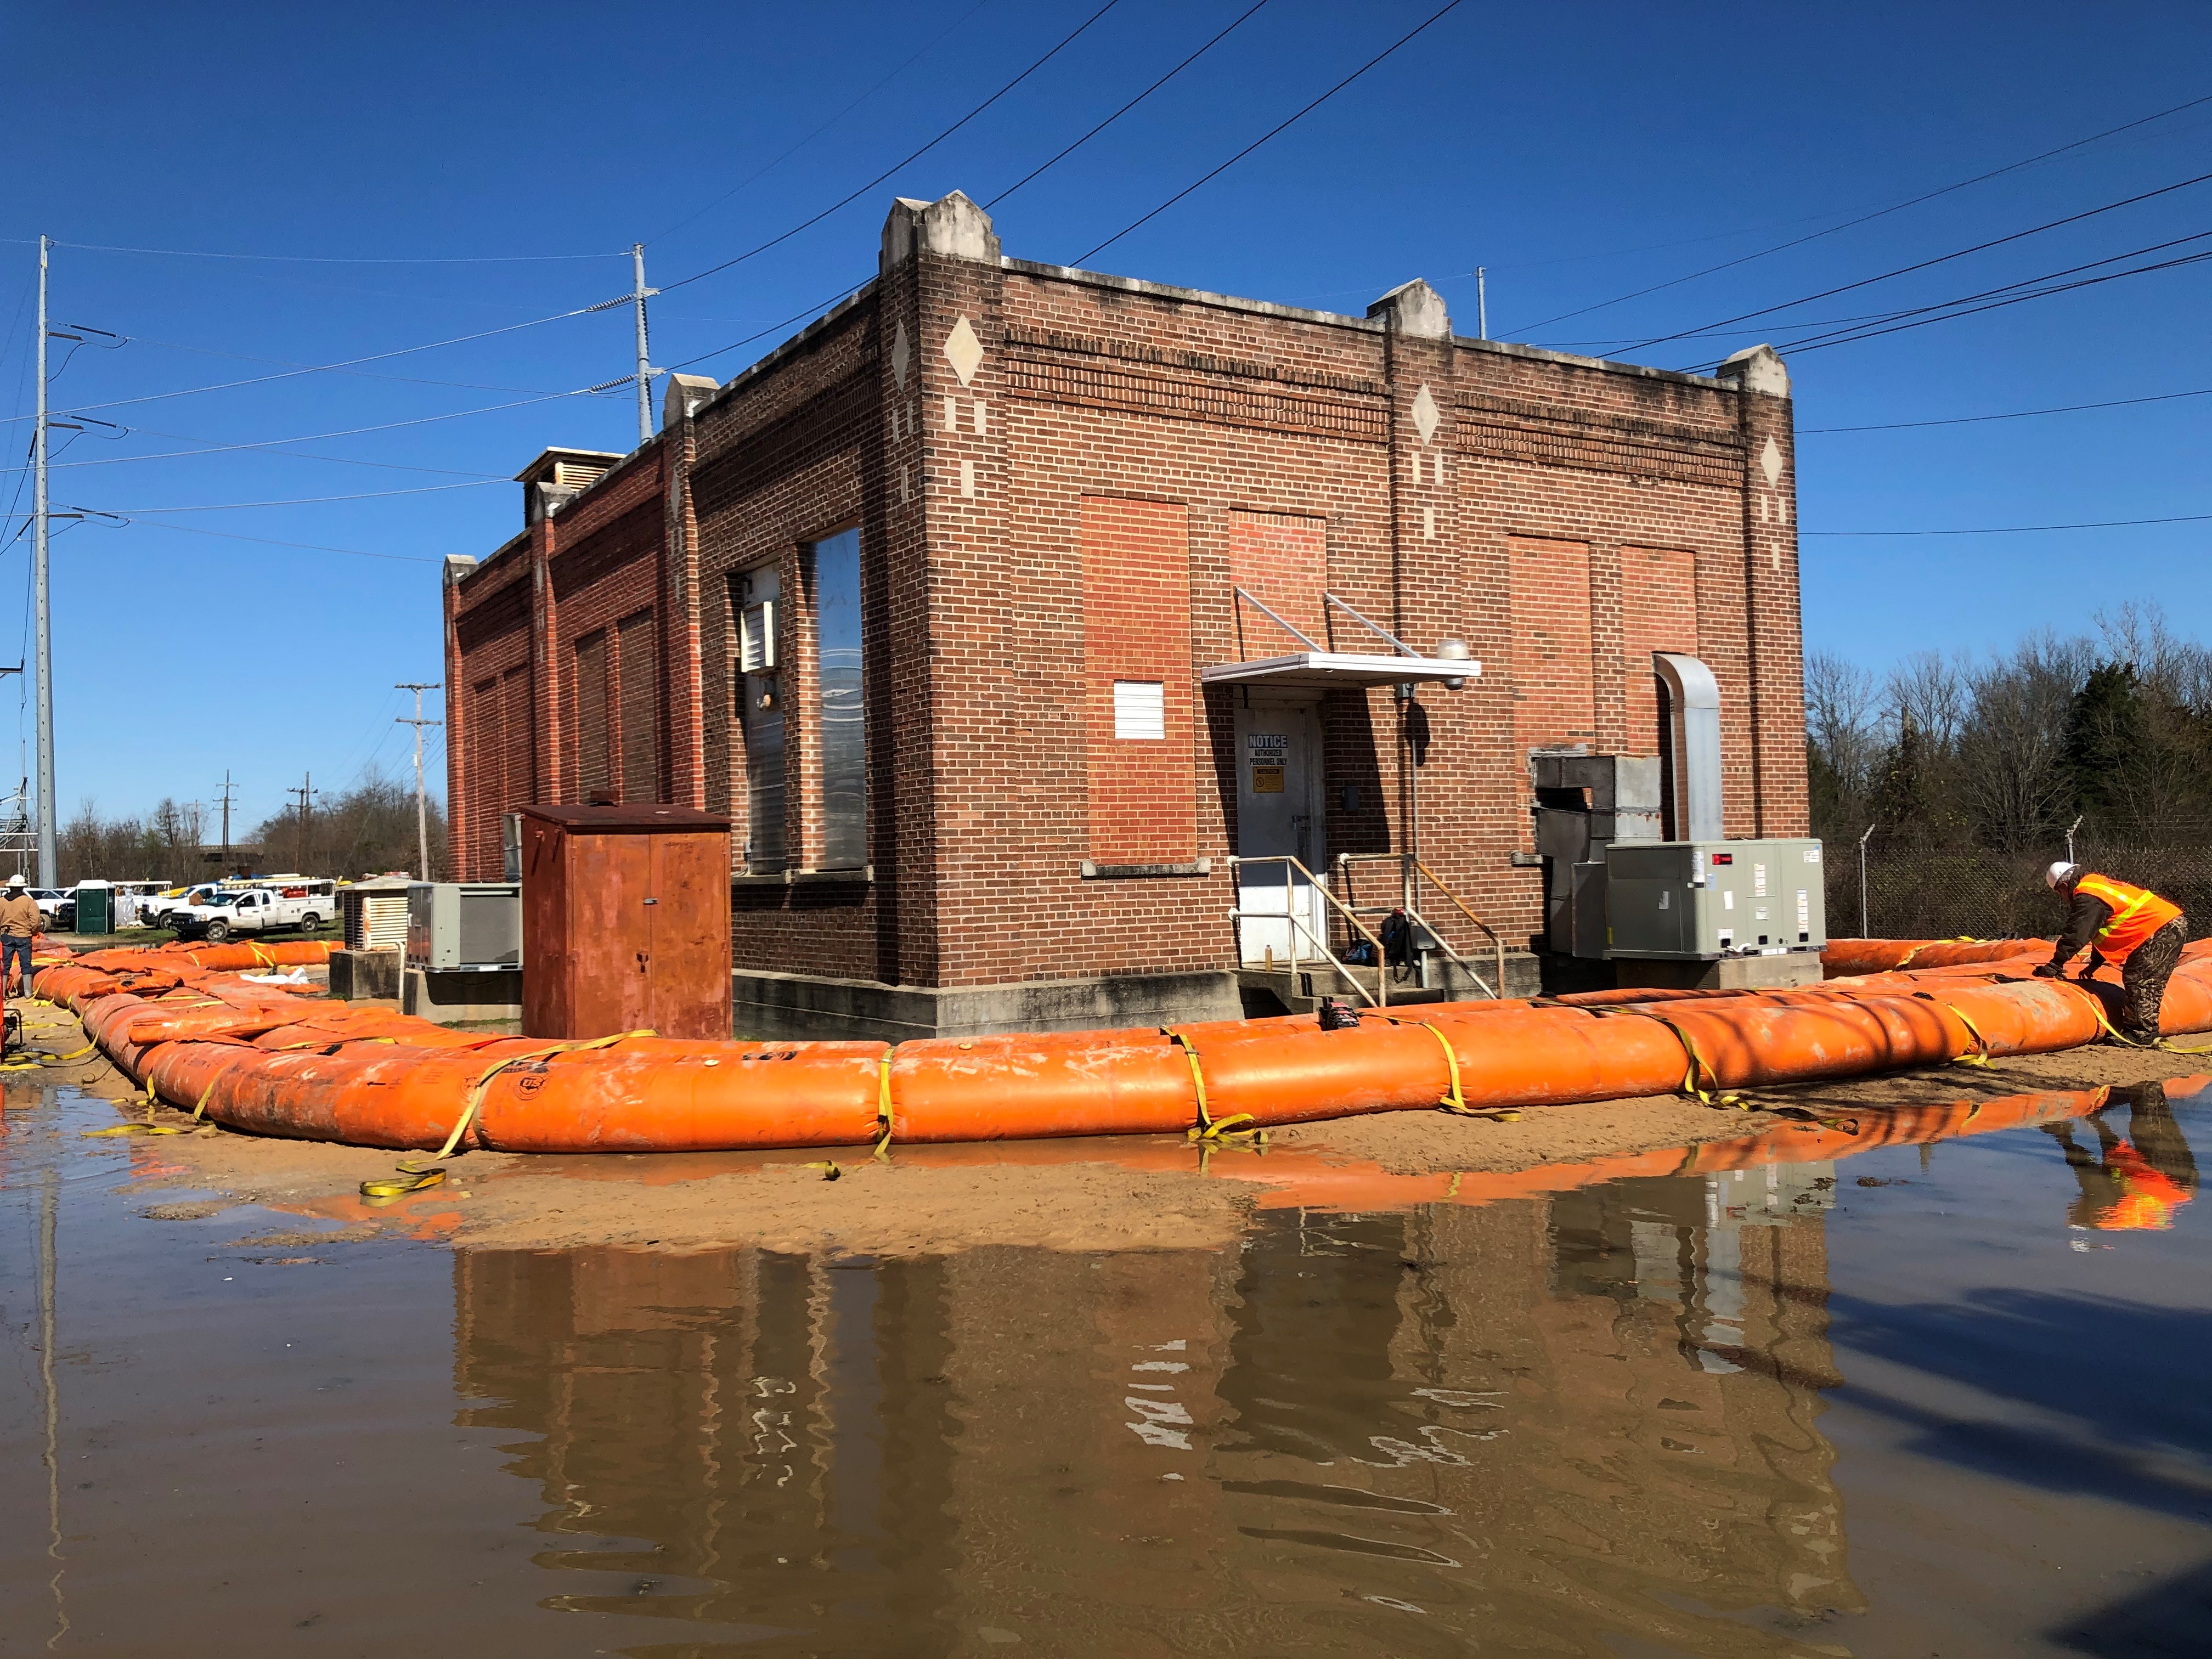 Crews built a tiger dam around the control house at the south Jackson substation to mitigate flooding issues. The substation has been de-energized.